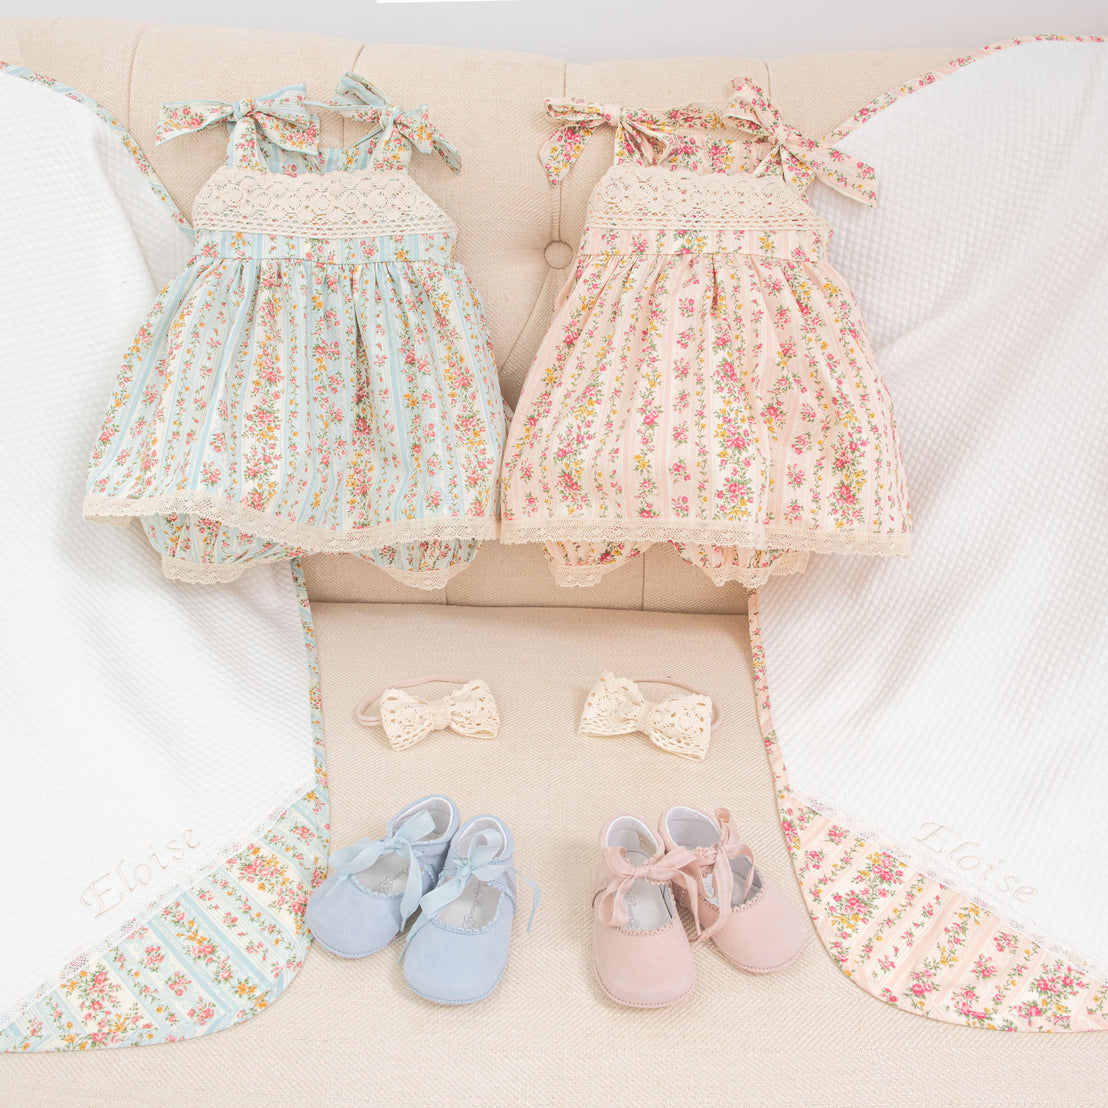 Flat lay photo of the complete Eloise outfit and collection, including the Eloise Romper Dress, Eloise Bow Headband, Eloise Suede Tie Mary Janes, and Eloise Personalized Blanket in the two color variations "sky blue" and "blush".